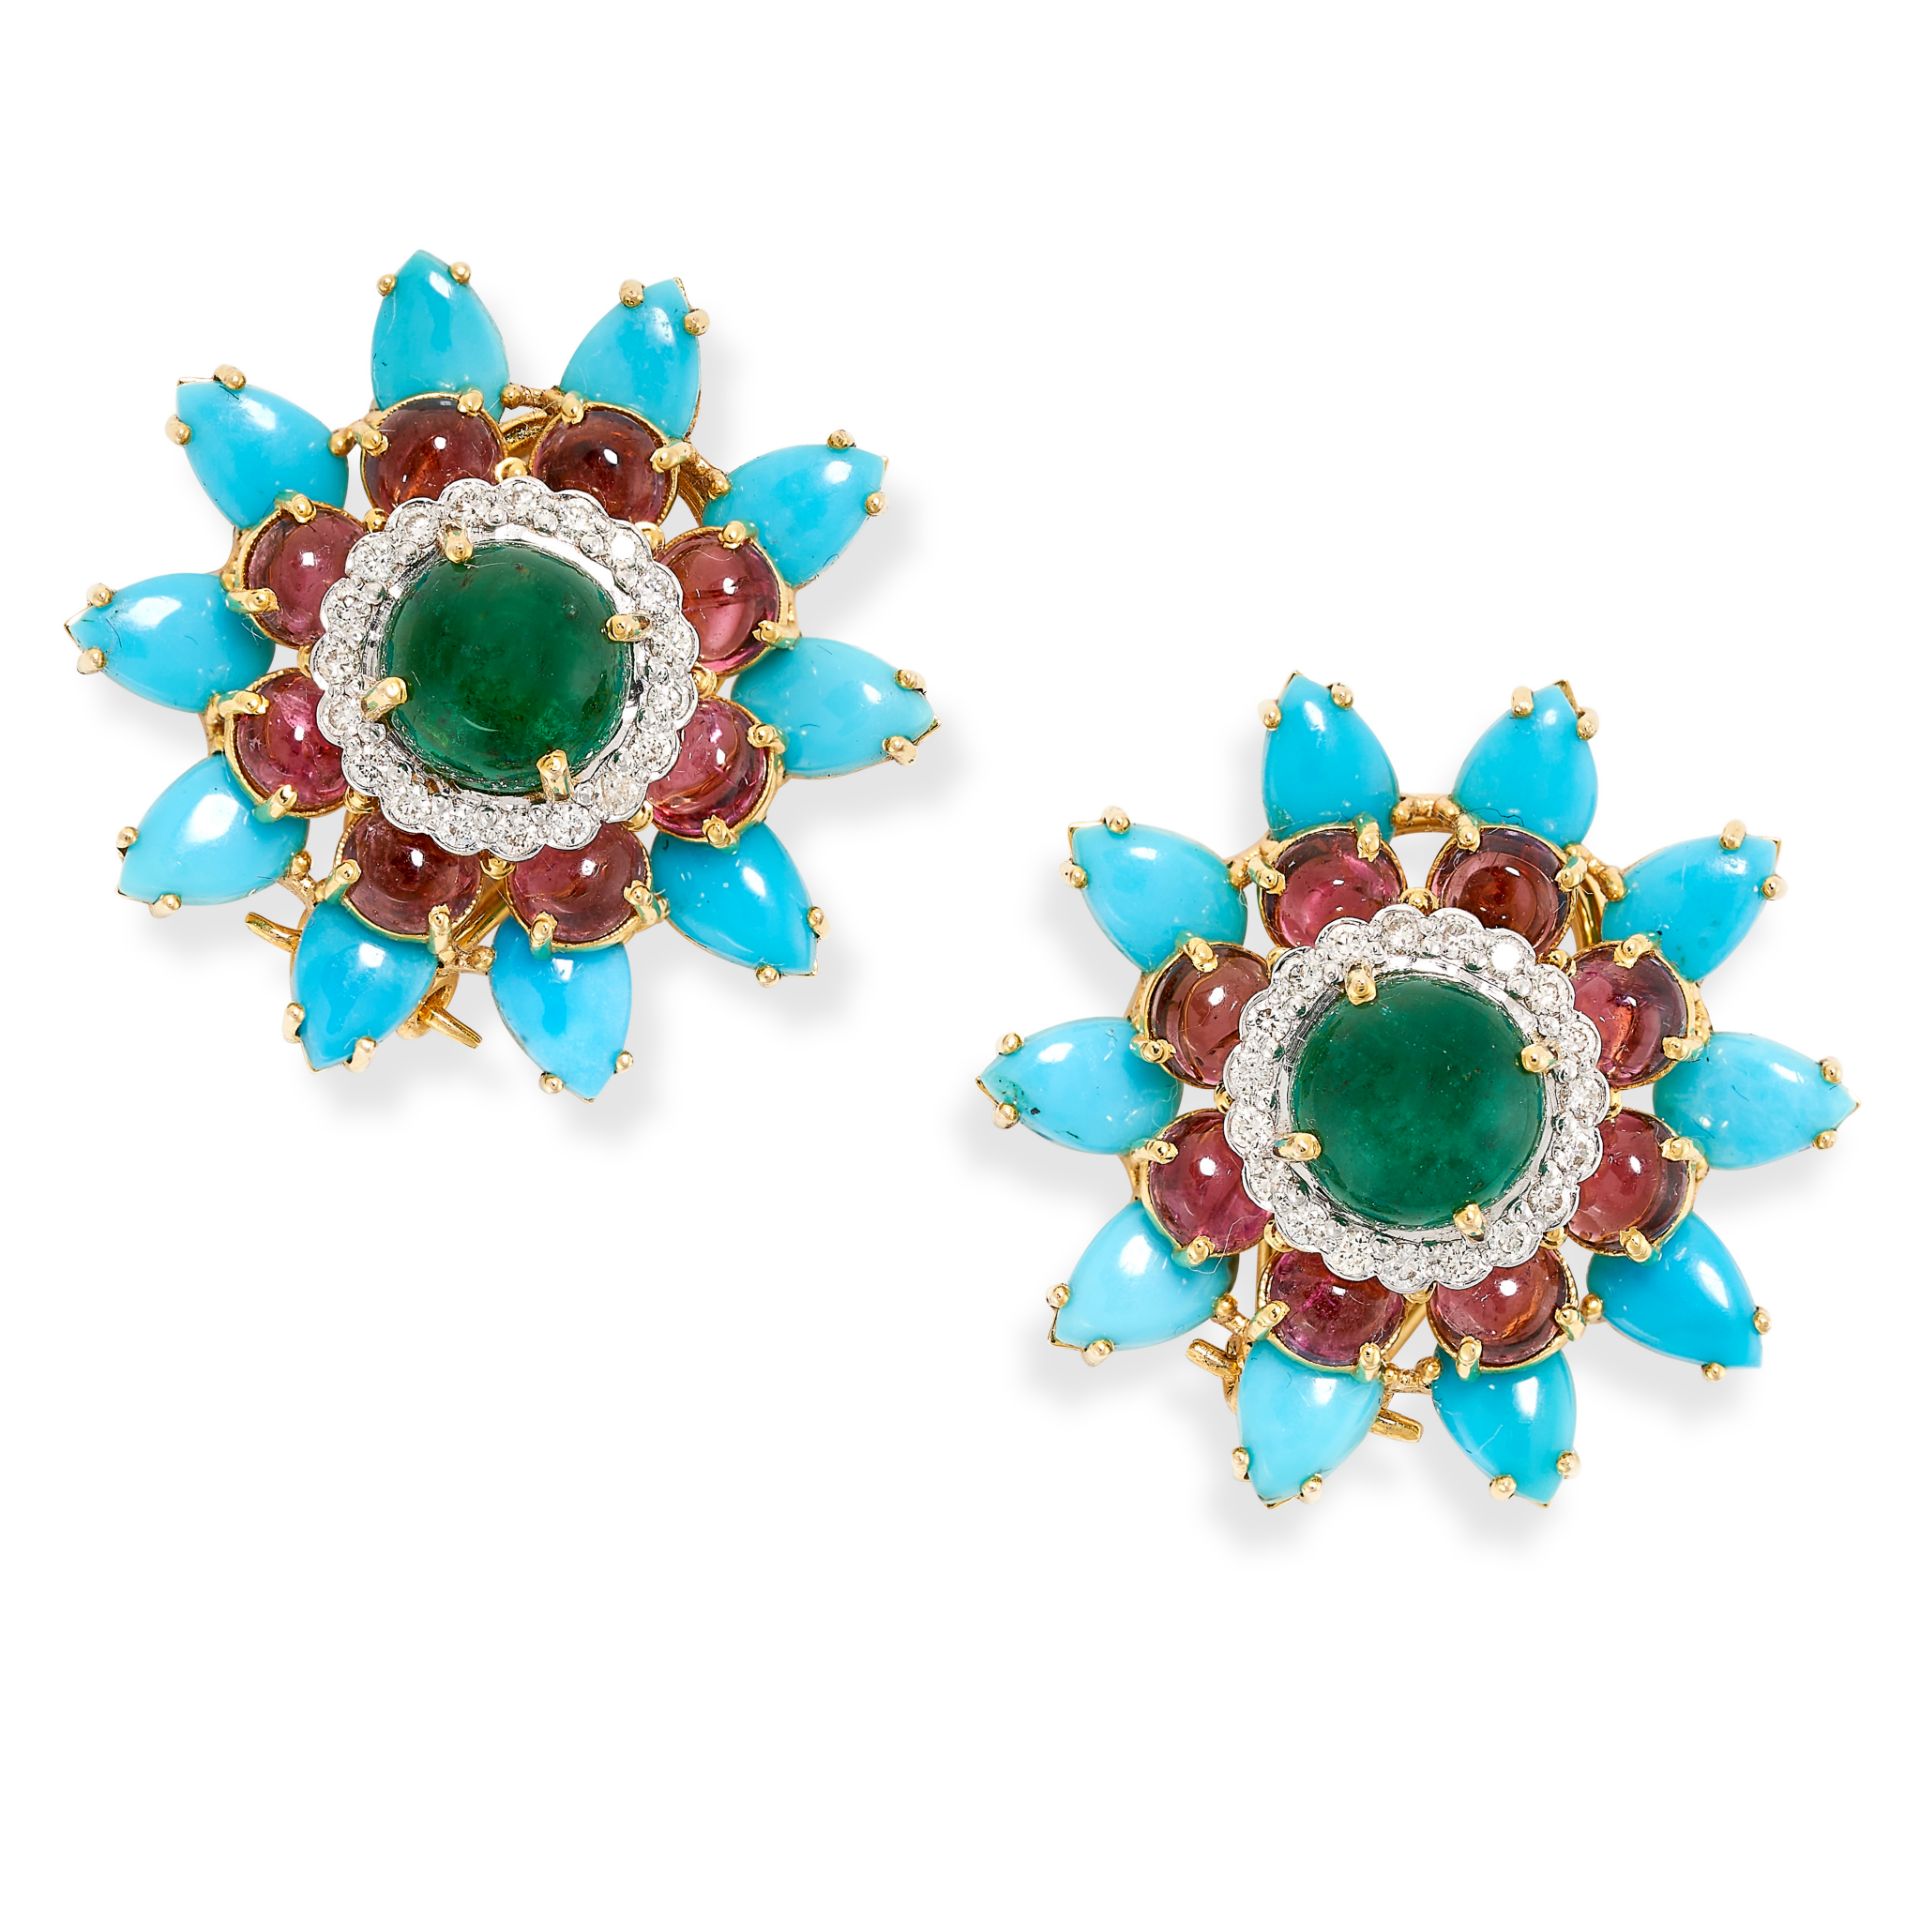 A PAIR OF EMERALD, DIAMOND, GARNET AND TURQUOISE EARCLIPS each set with a cabochon emerald in a